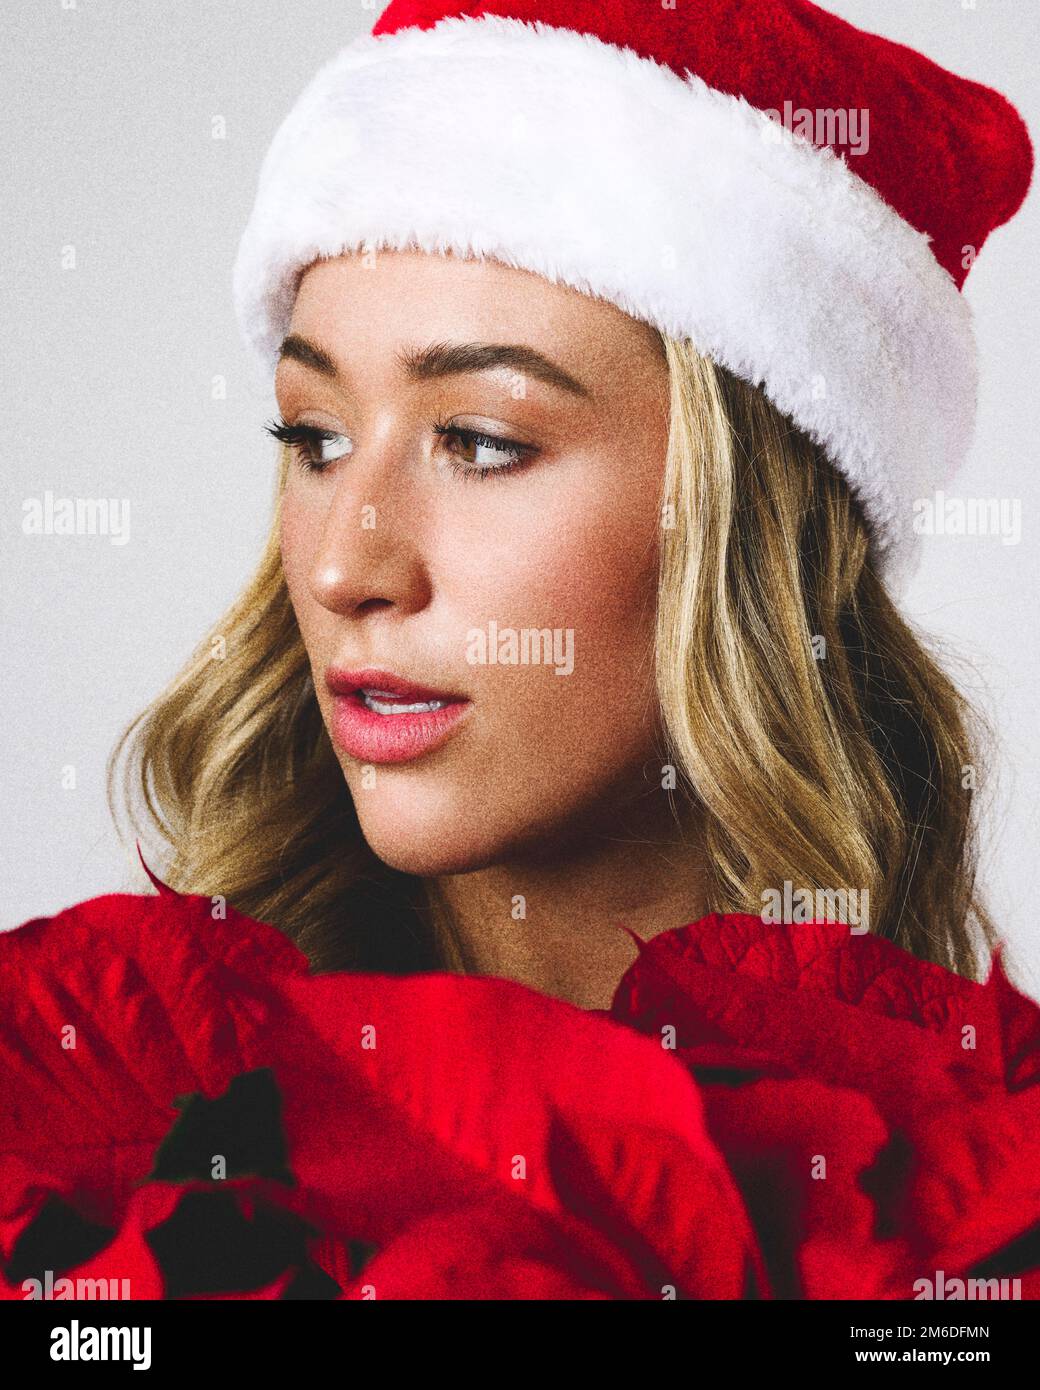 Close up Young Woman Holding Poinsettia Plant | Santa Hat Stock Photo